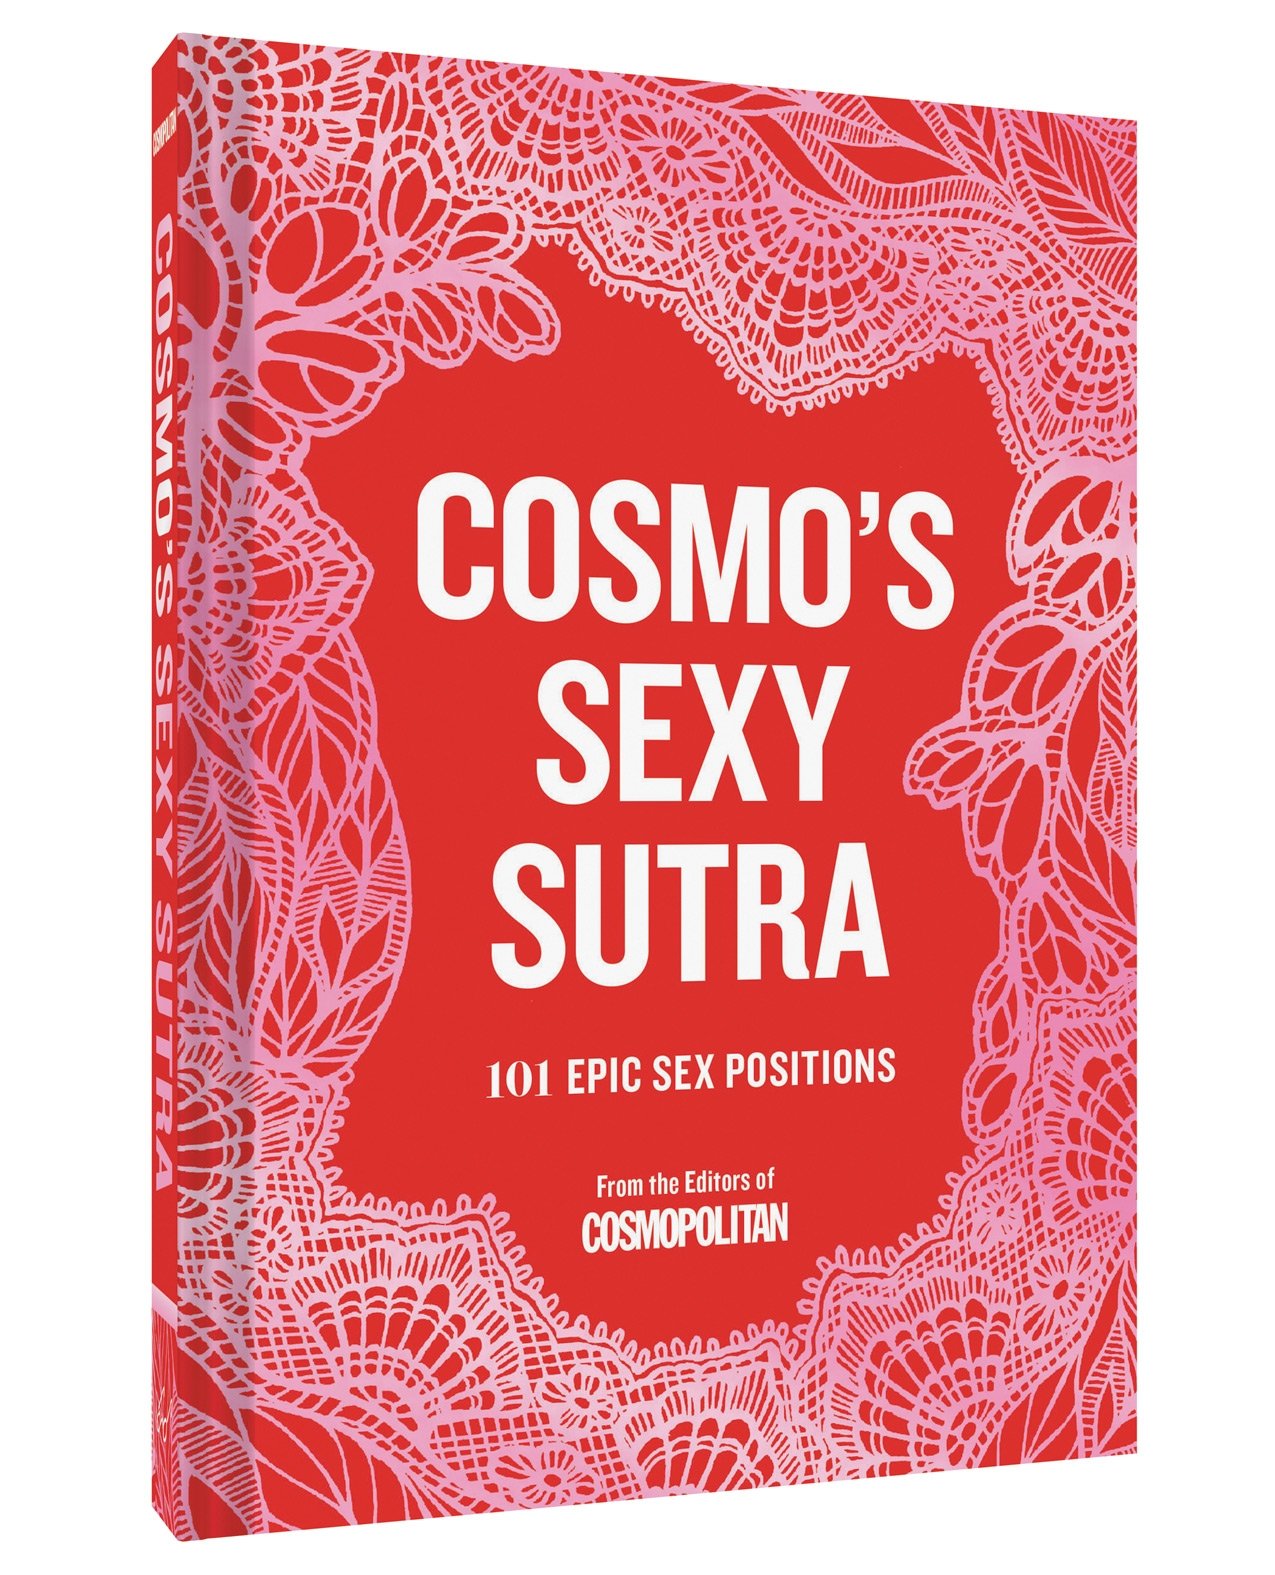 Cosmos Sexy Sutra 101 Epic Sex Position Book by Hachette book group usa Cupids Lingerie photo